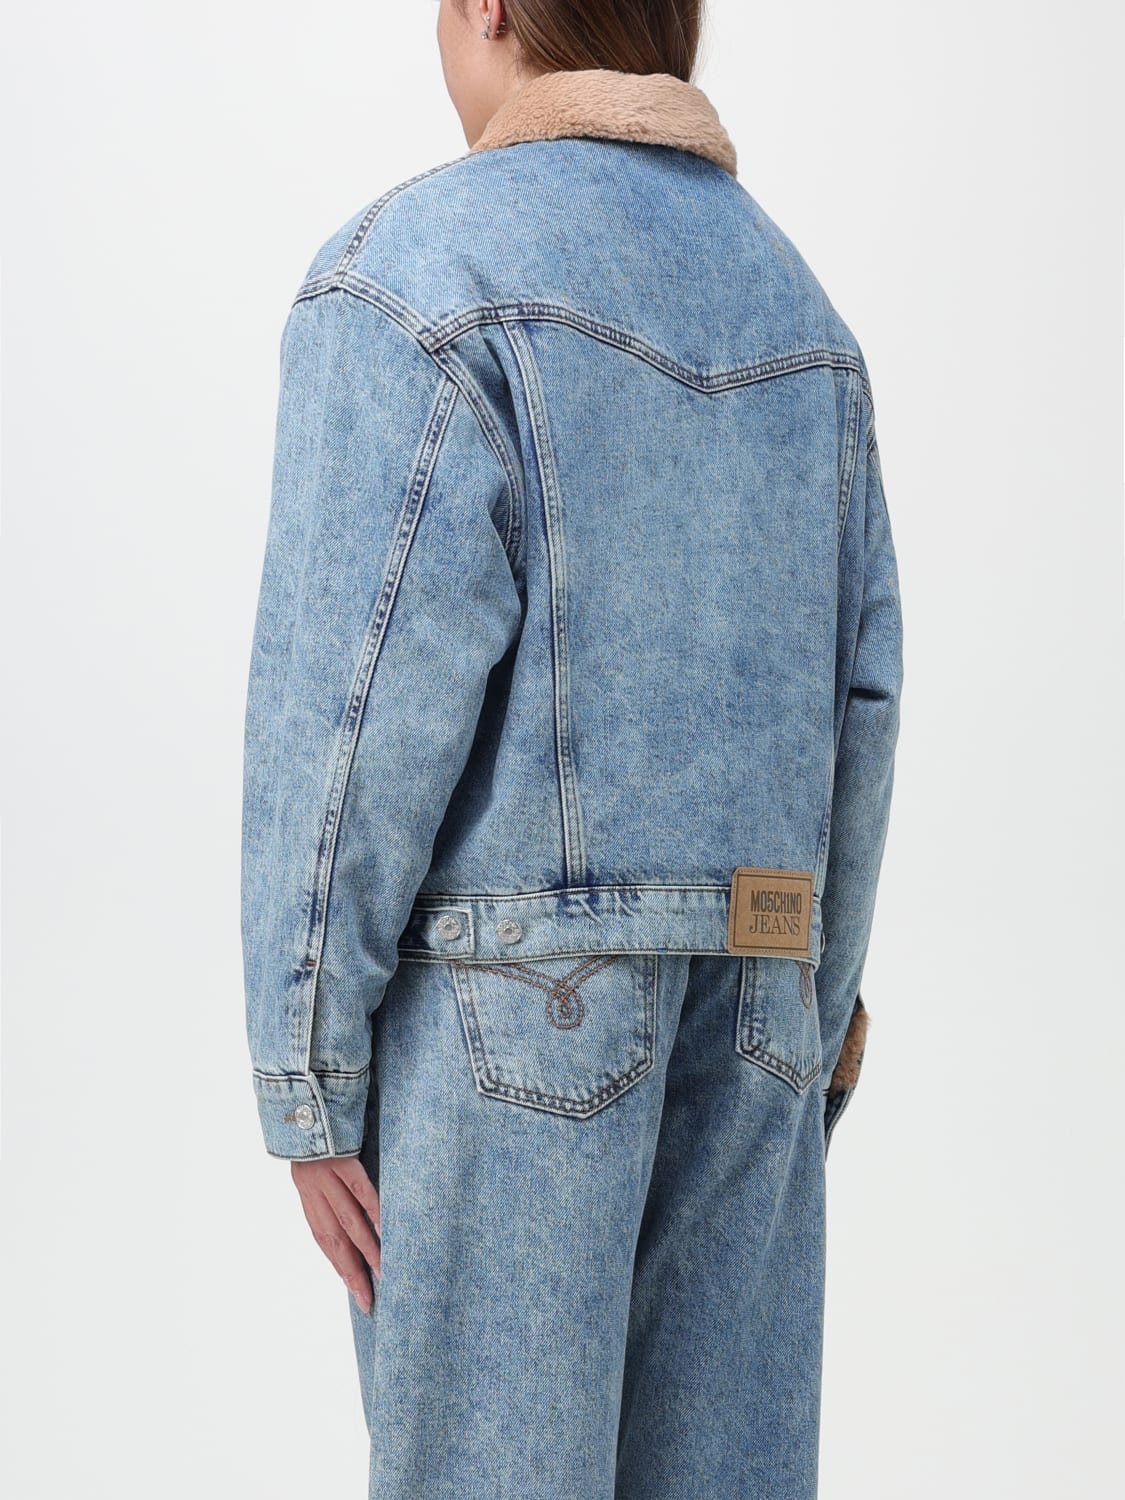 Jacket woman Moschino Jeans